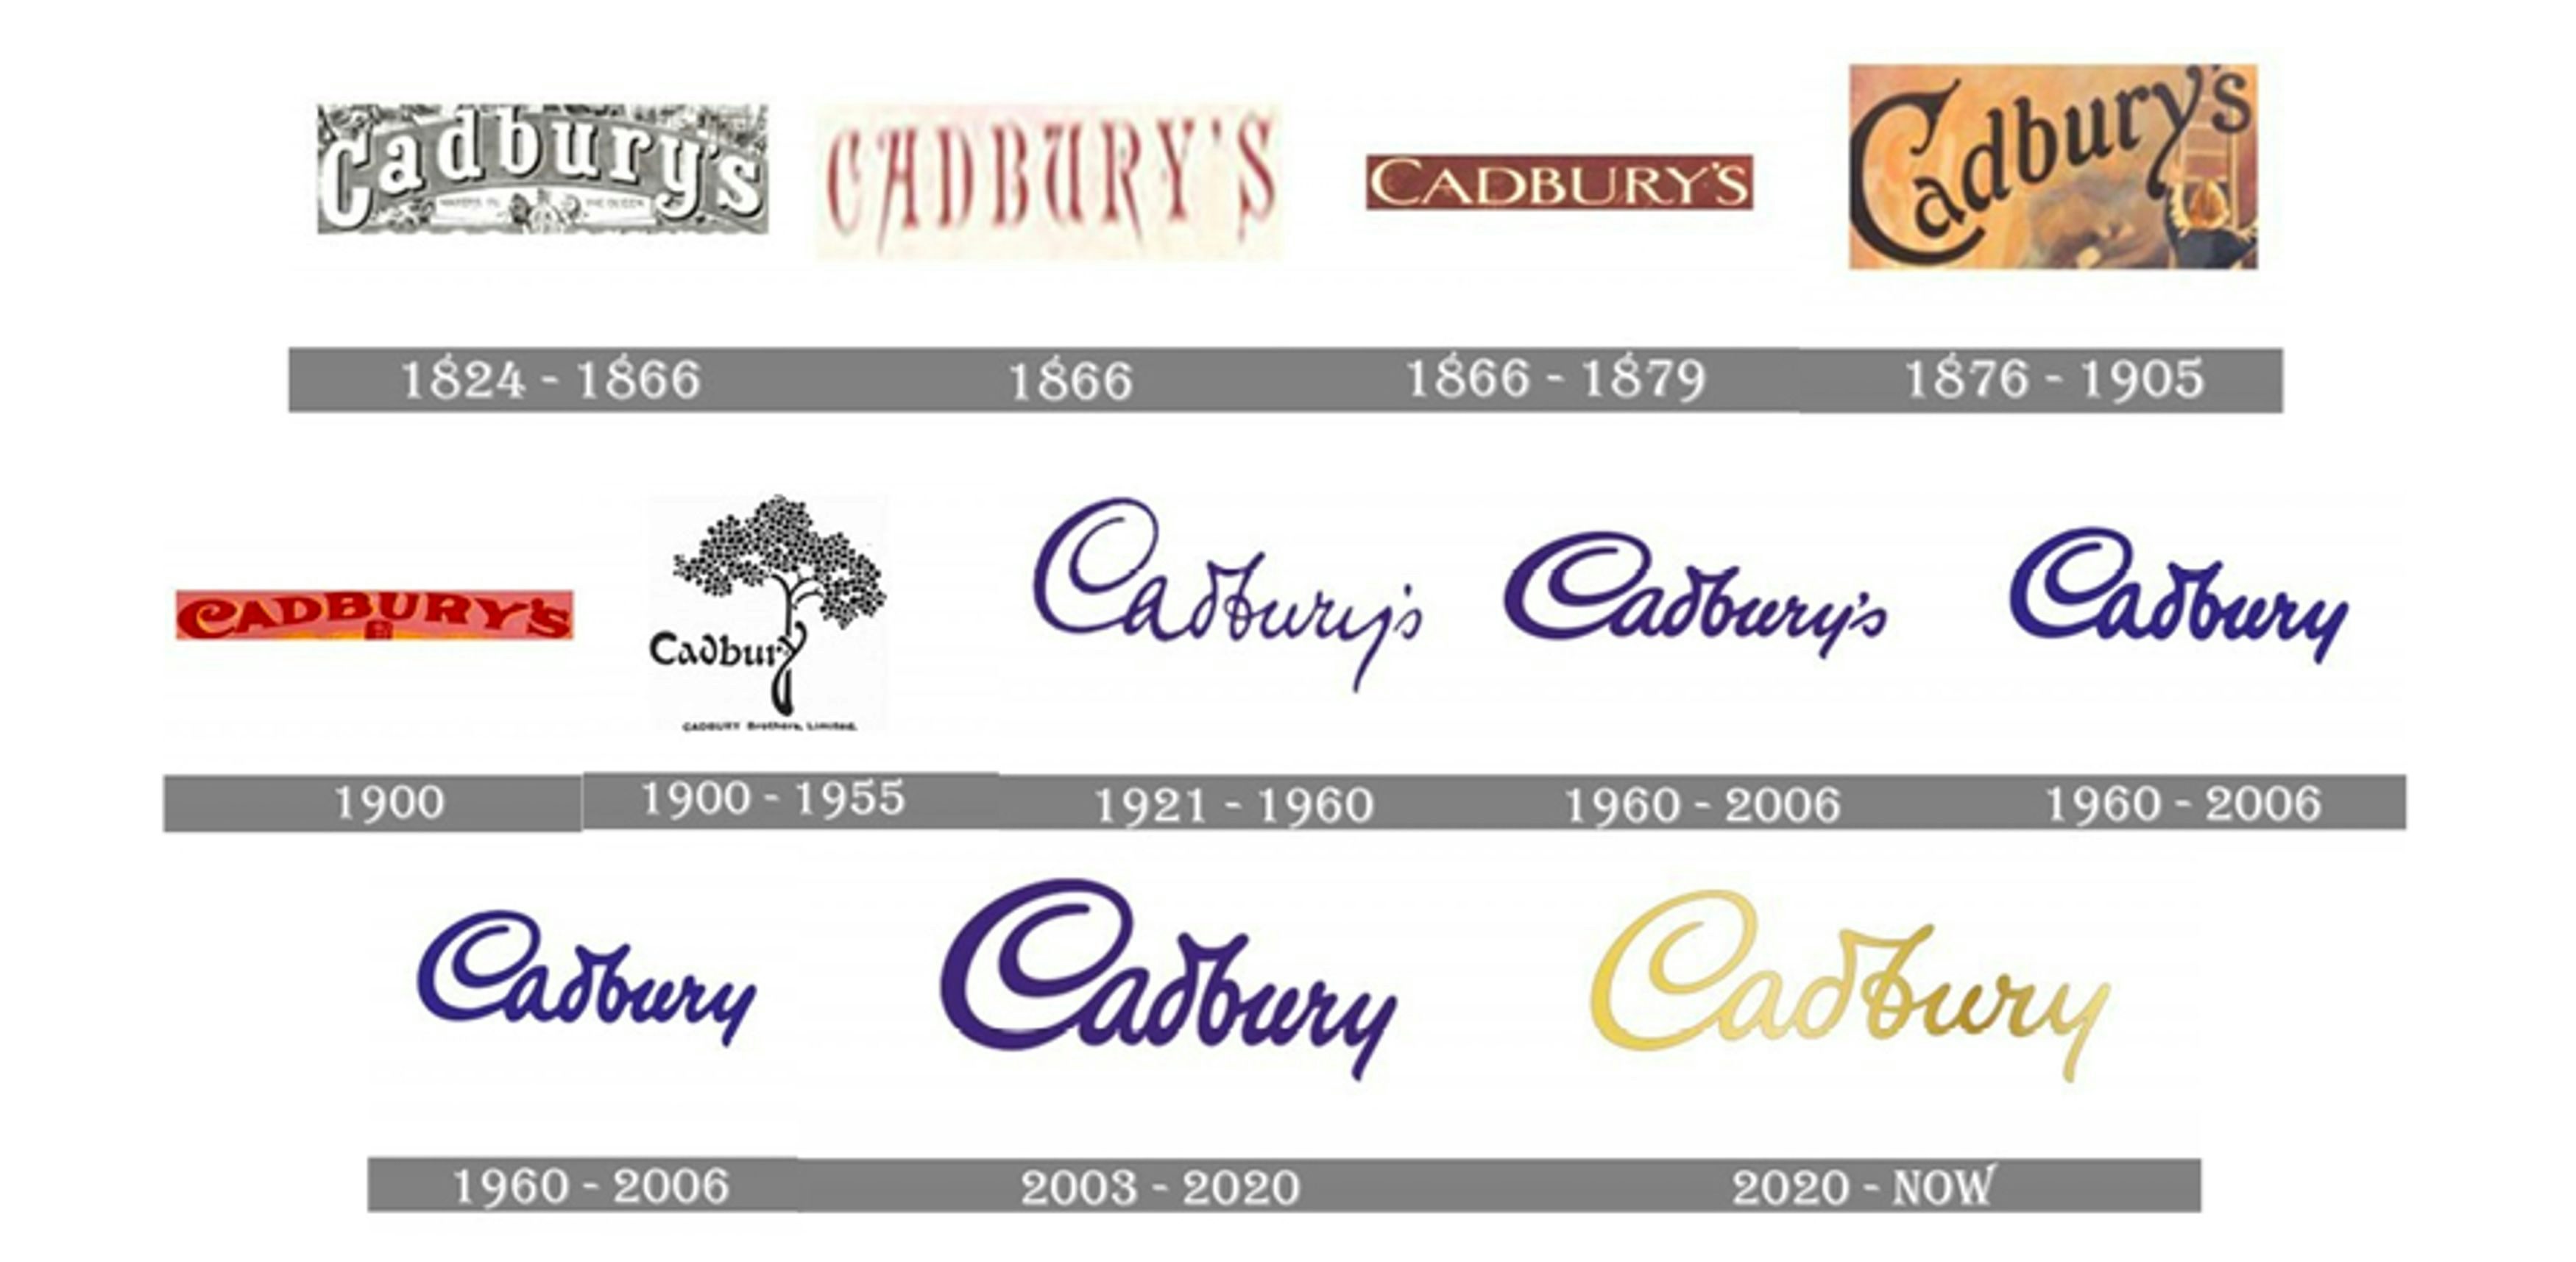 Timeline showing the evolution of Cadbury's logo from 1824 to the present, with various designs and colour changes throughout the years.